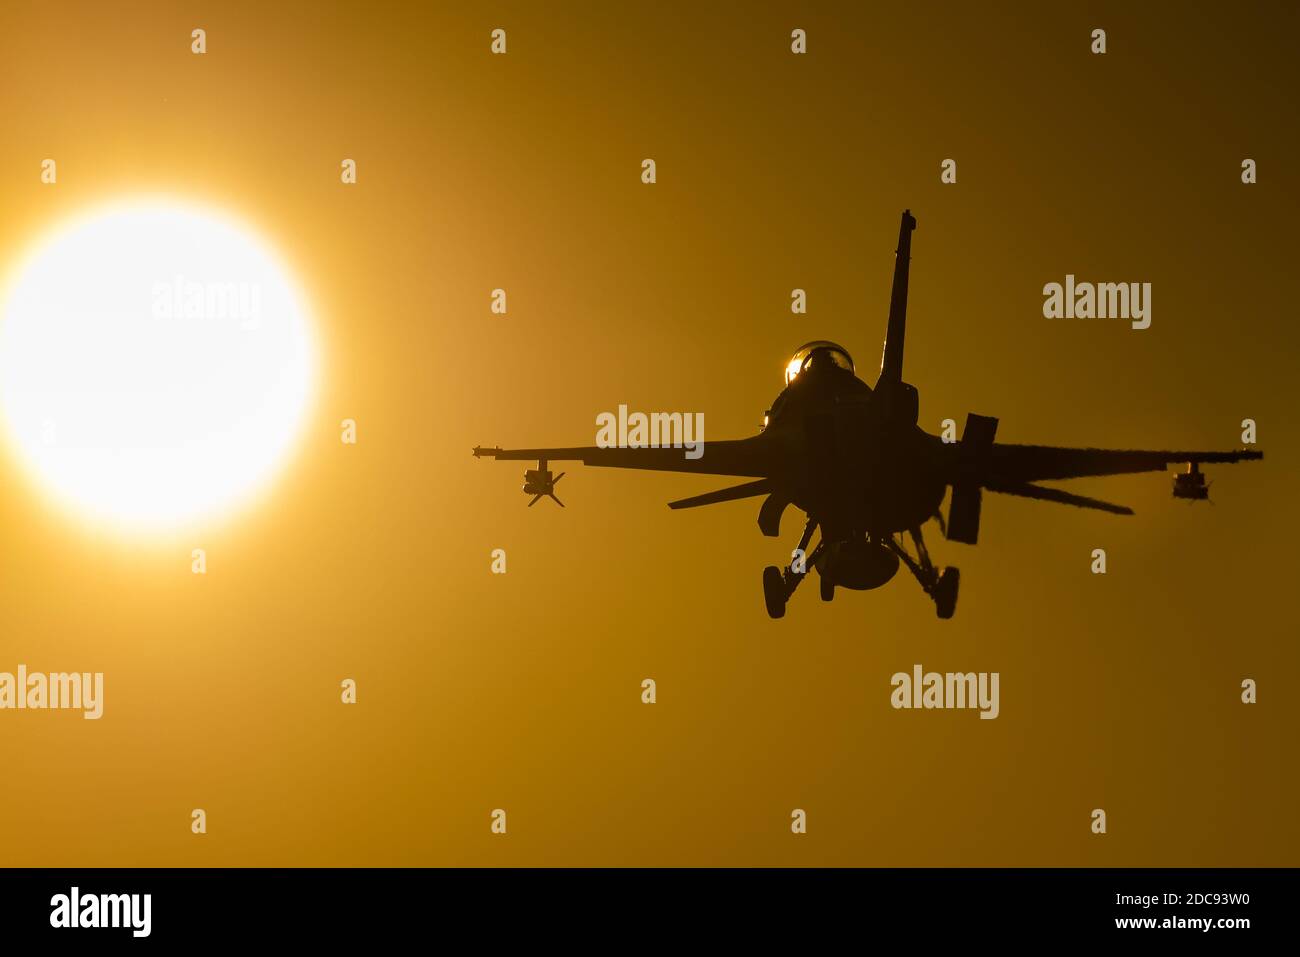 A F-16 Fighting Falcon multirole fighter jet is ready to land at sunset. Stock Photo